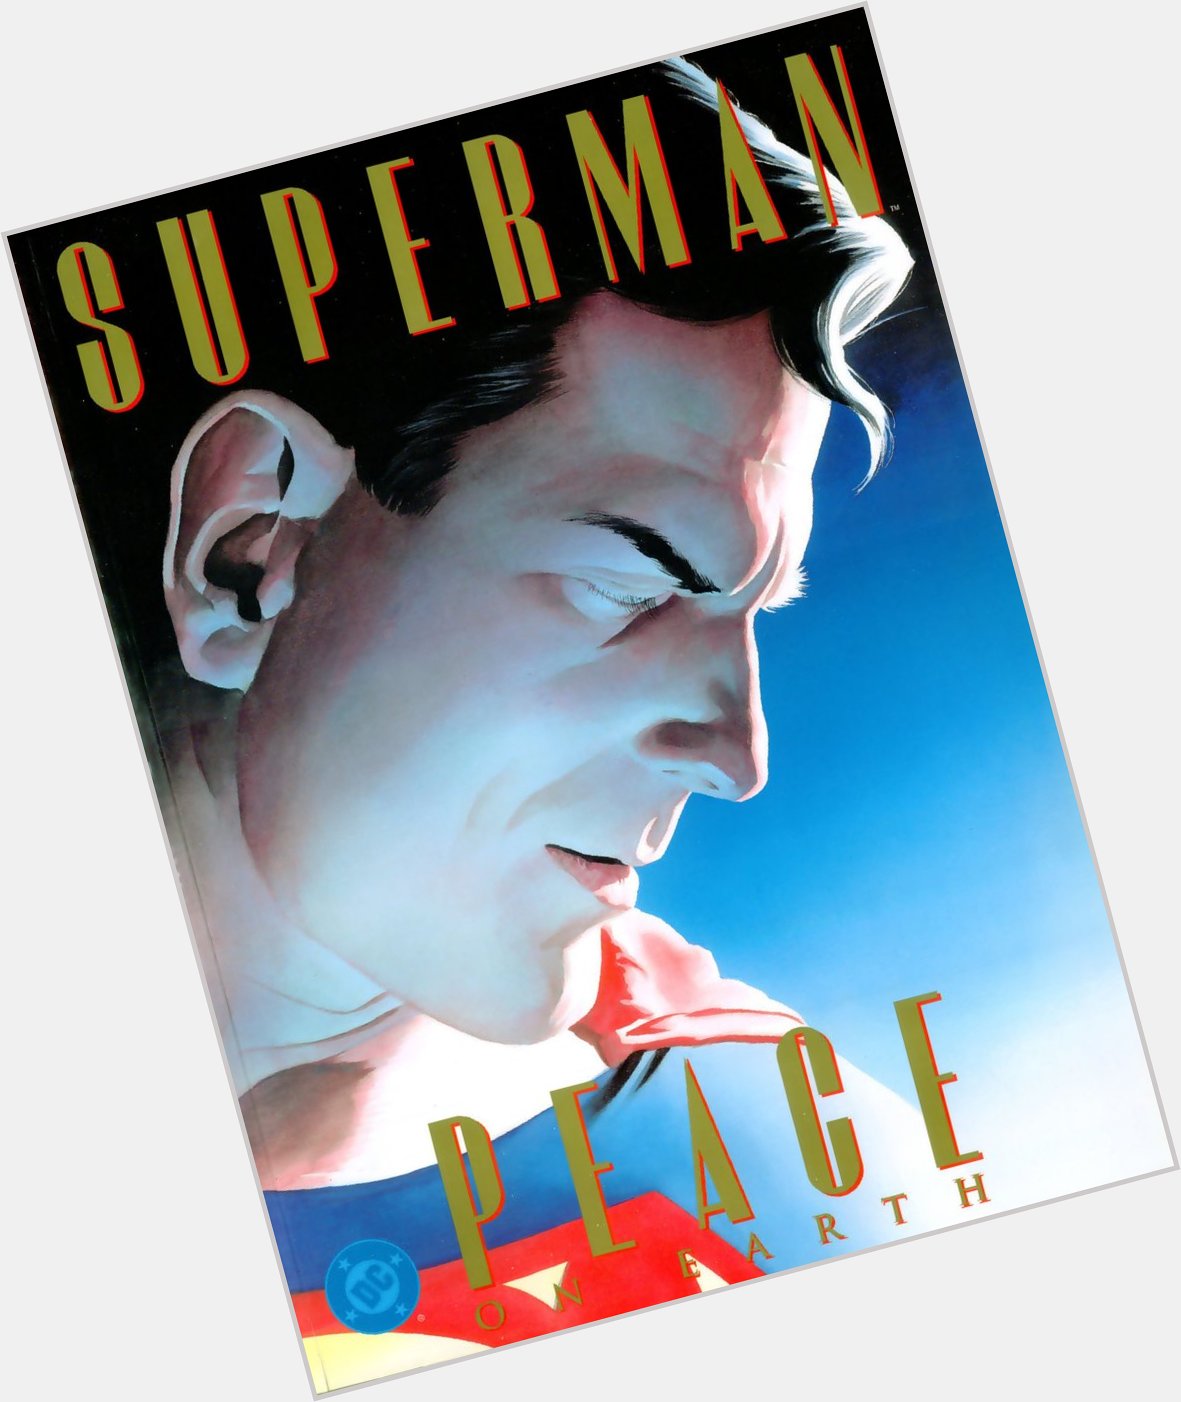 Happy birthday paul dini it\s time to recall Superman:peace on earth . 